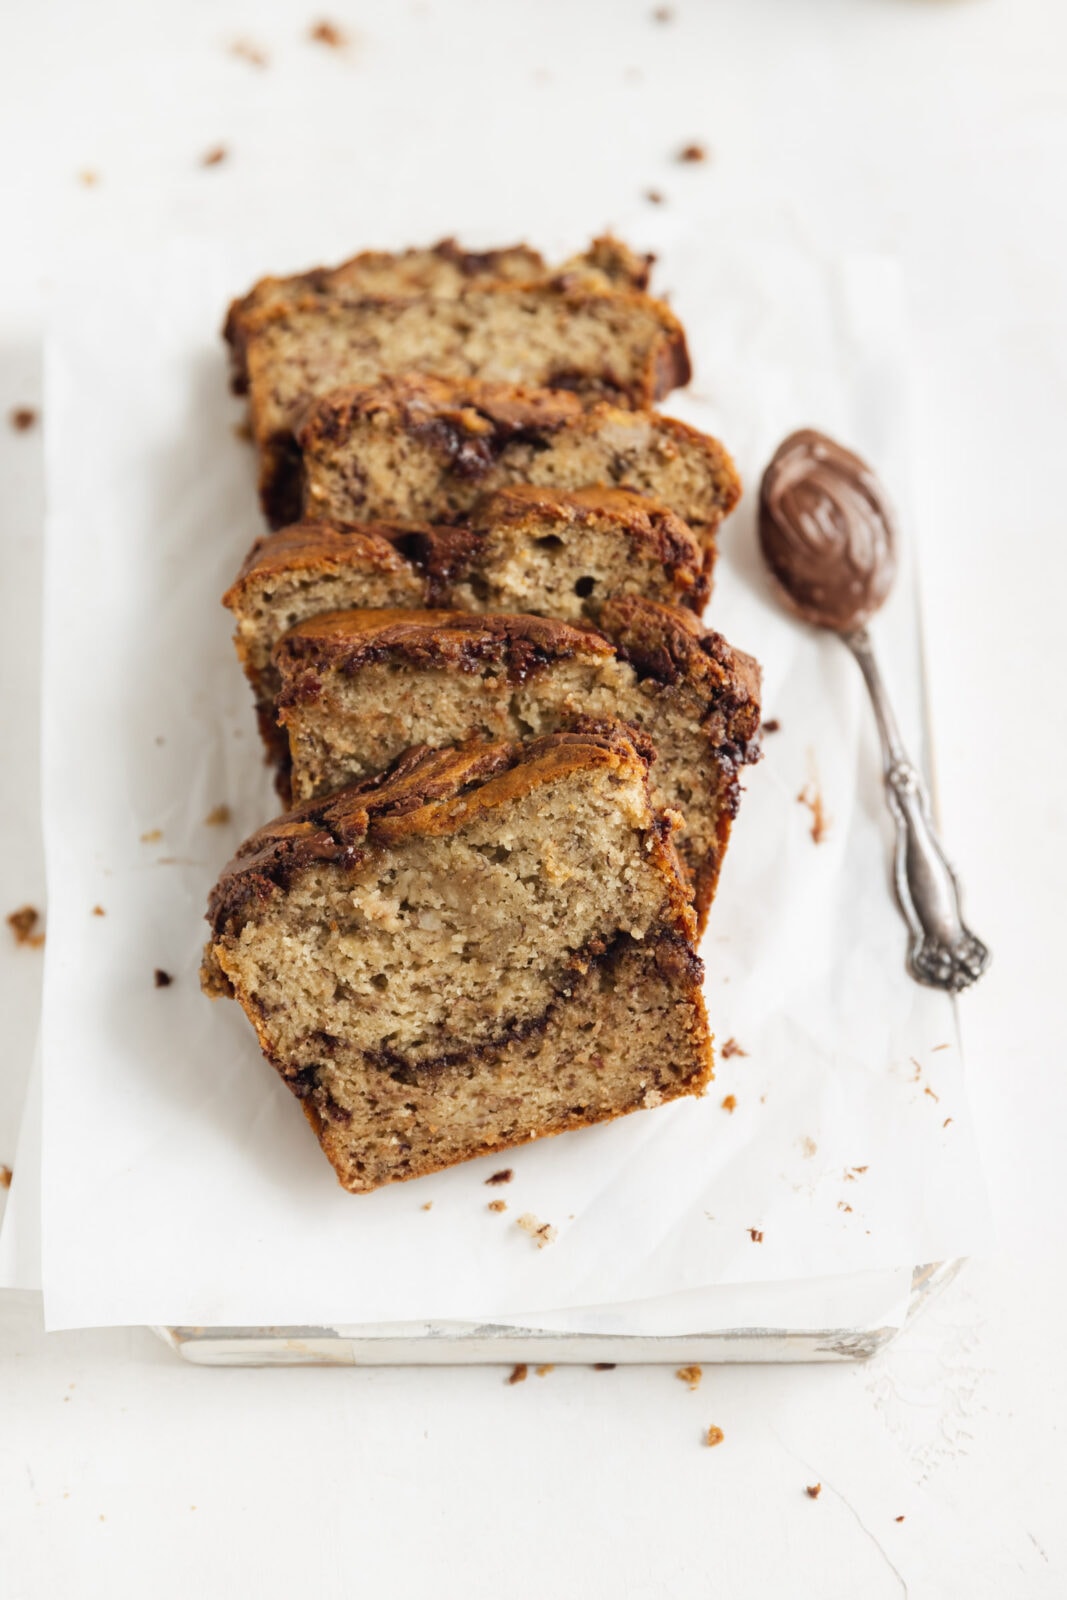 Nutella banana bread with a spoonful of Nutella